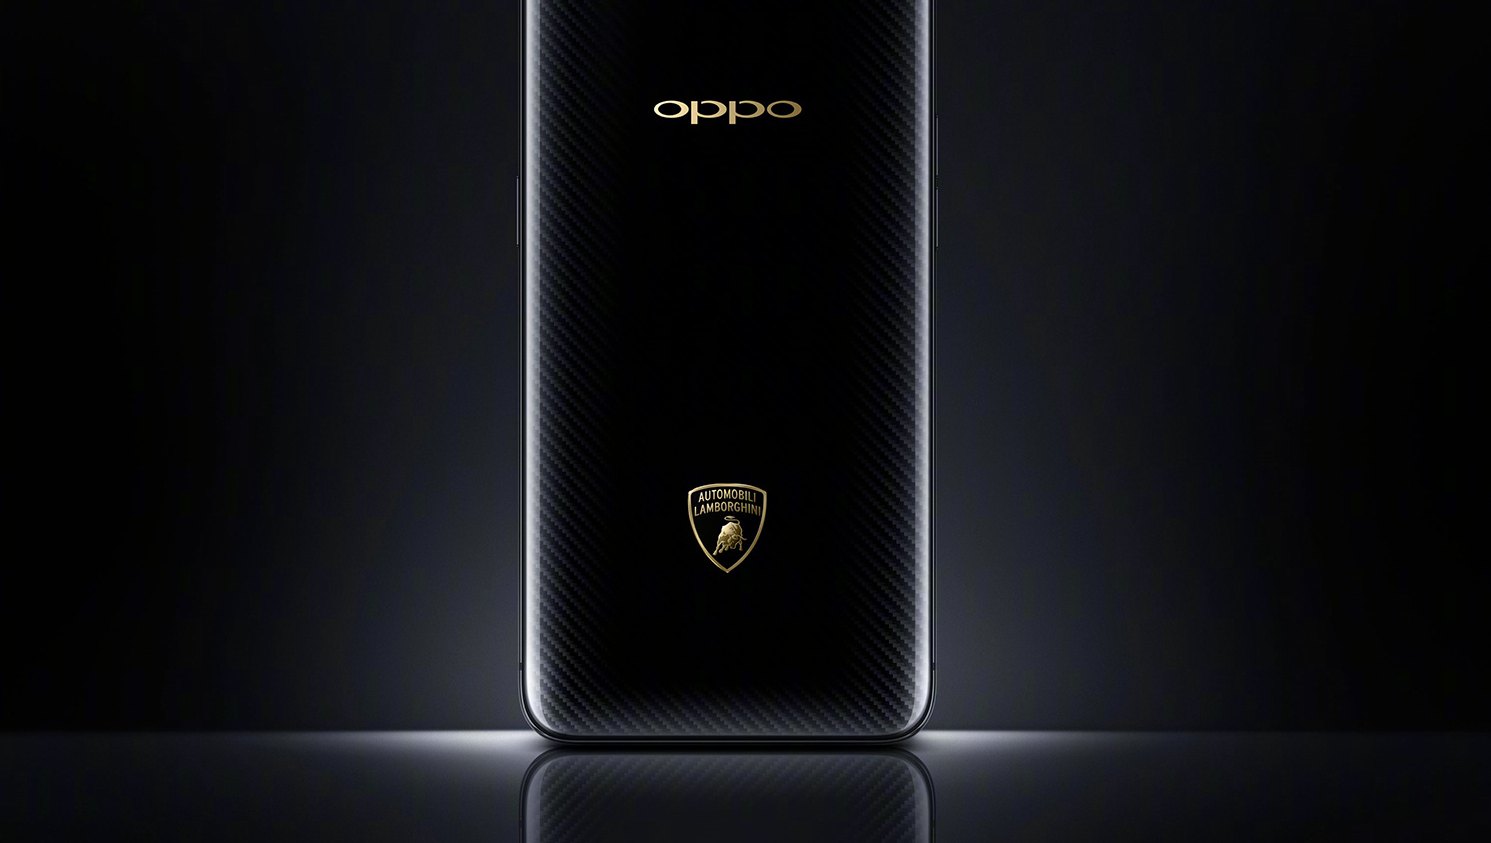 You can fully charge the OPPO Find X Lamborghini Edition in just 35